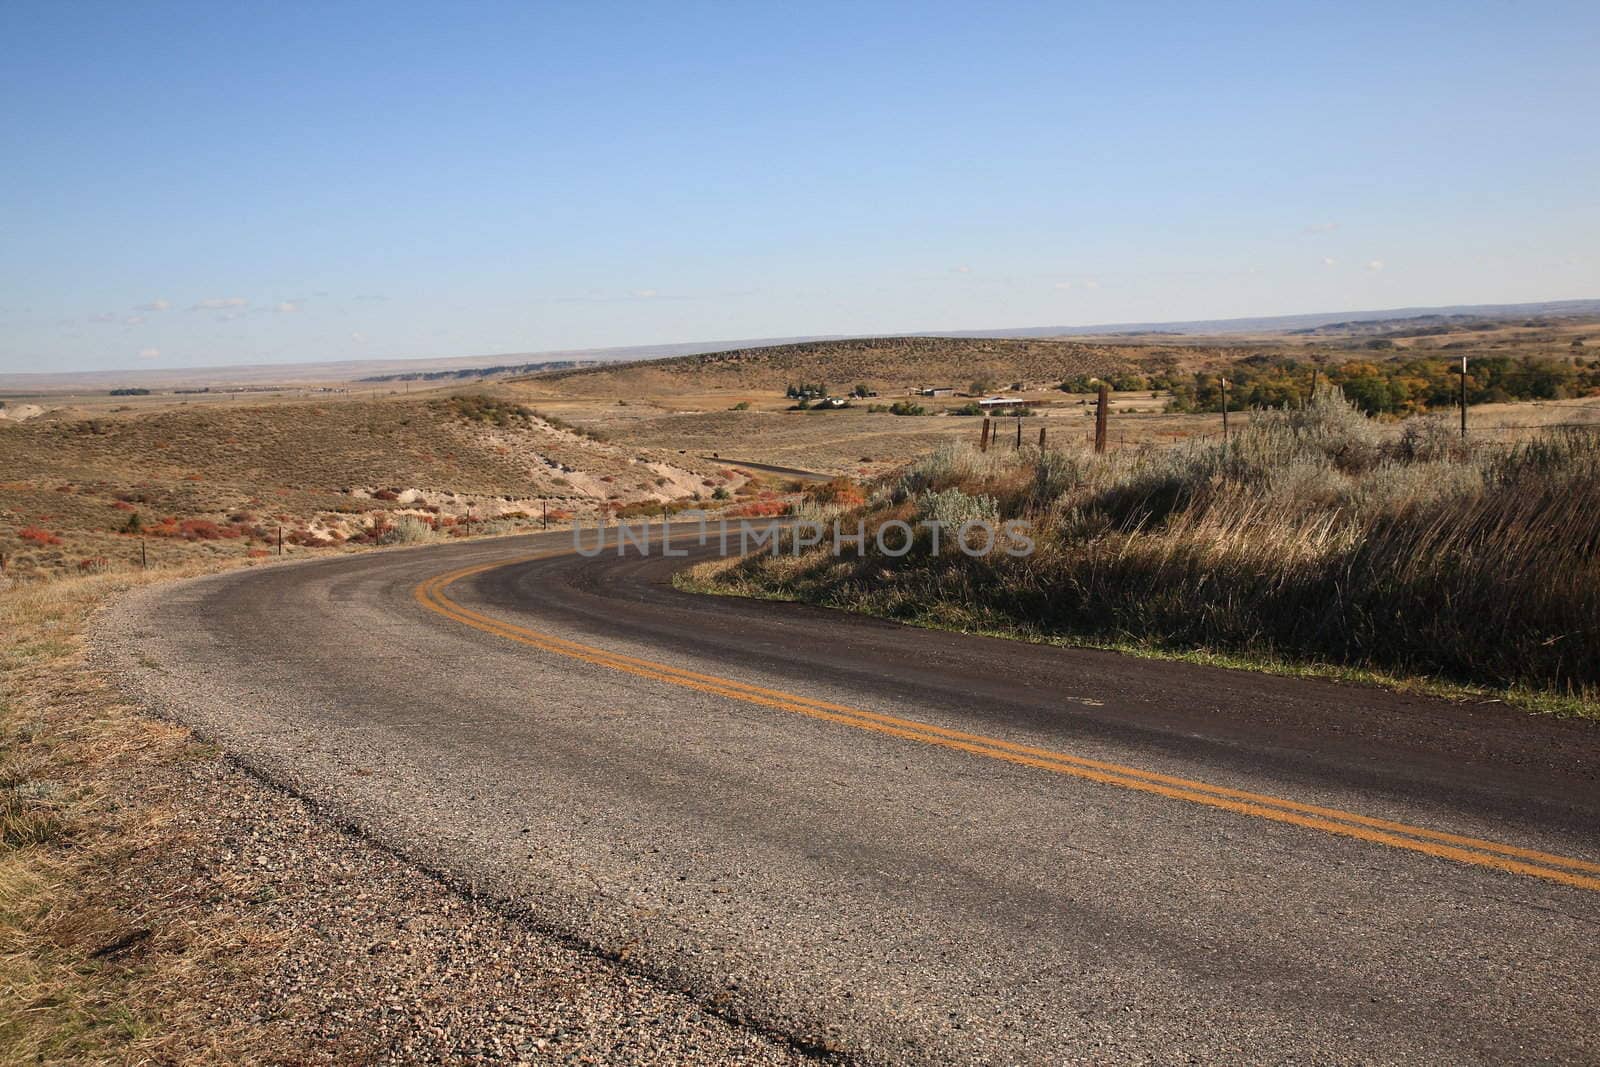 Isolated winding road in American Great Plains